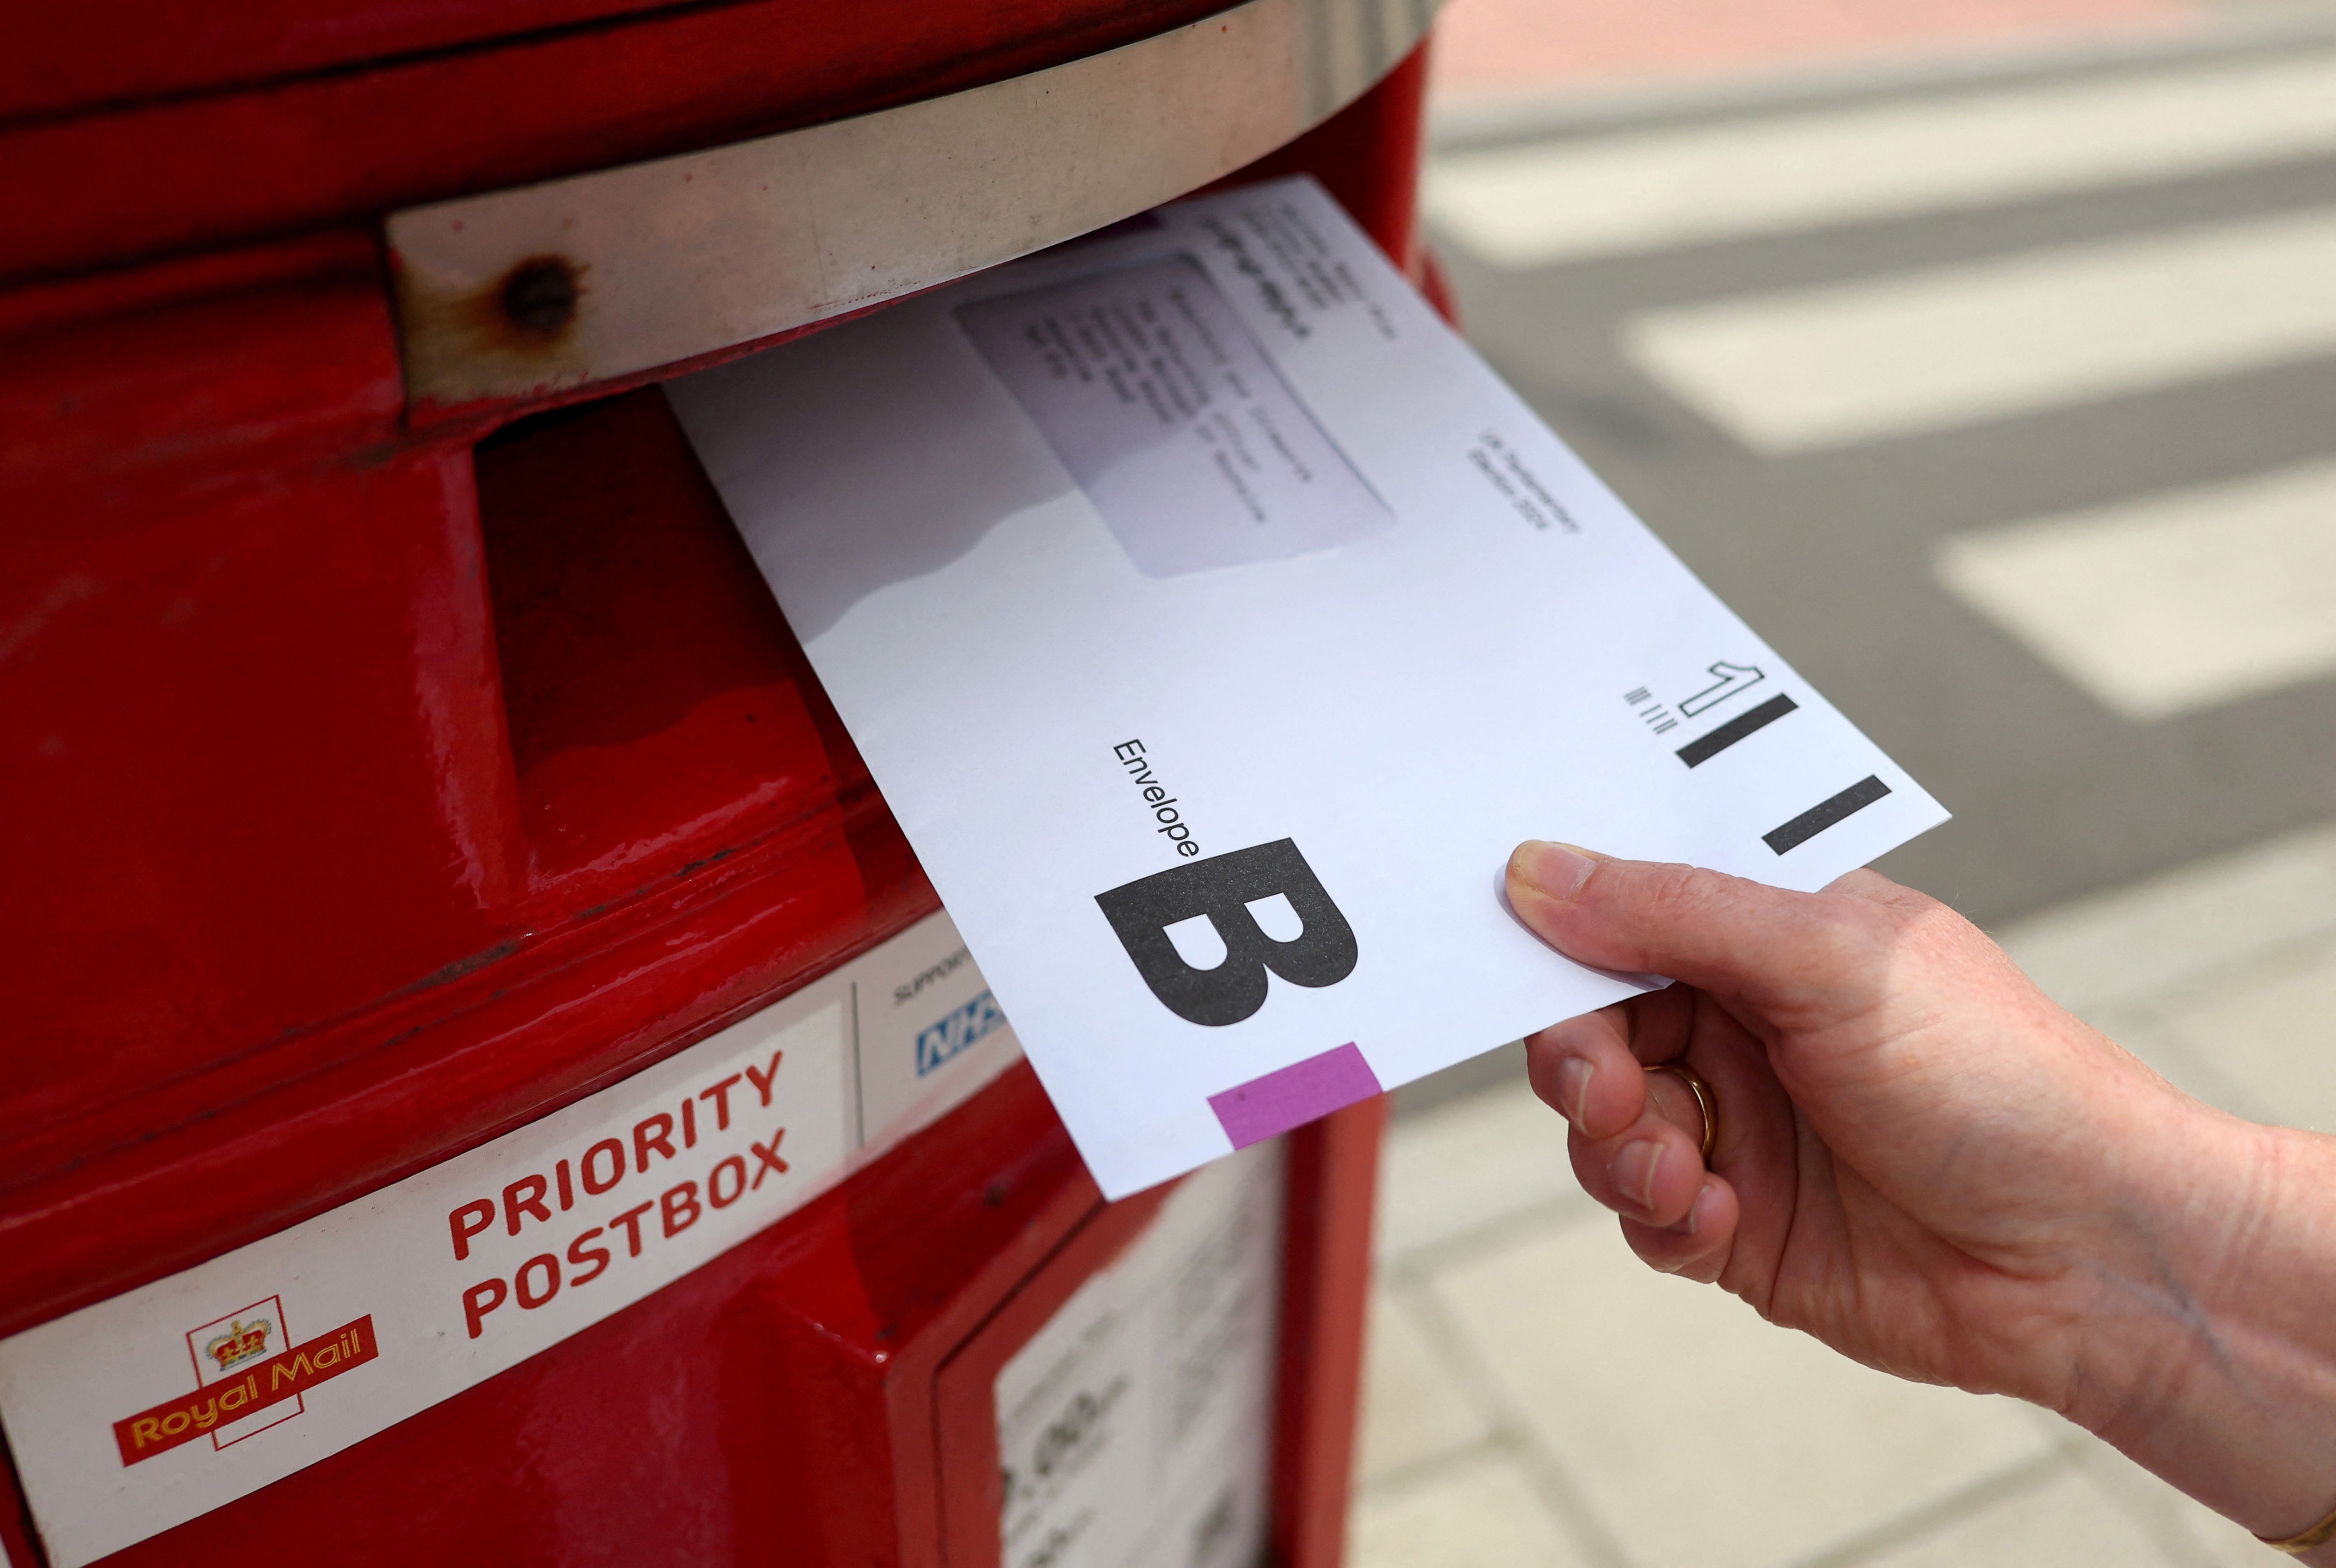 pa ready, kevin hollinrake, royal mail, maria caulfield, kevin, john swinney, government, rishi sunak, local government association, delays to postal vote delivery being urgently investigated, says minister